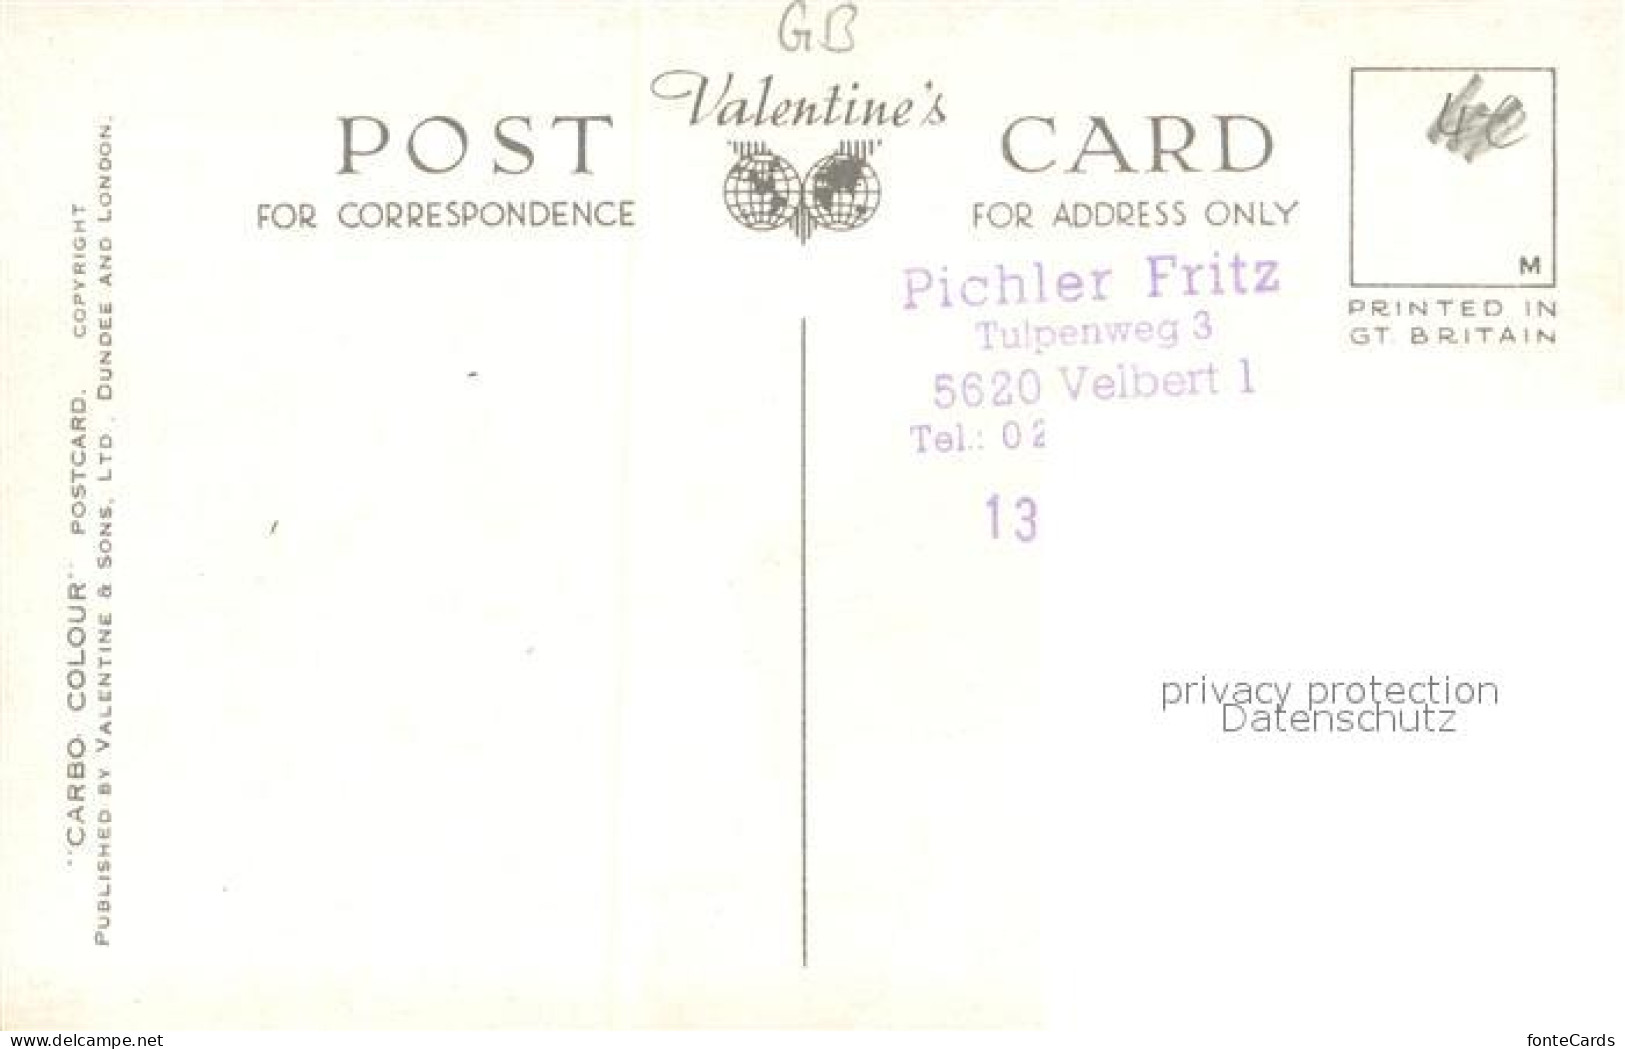 73690024 Hunstanton Promenade And Shelters Valentine's Postcard  - Other & Unclassified